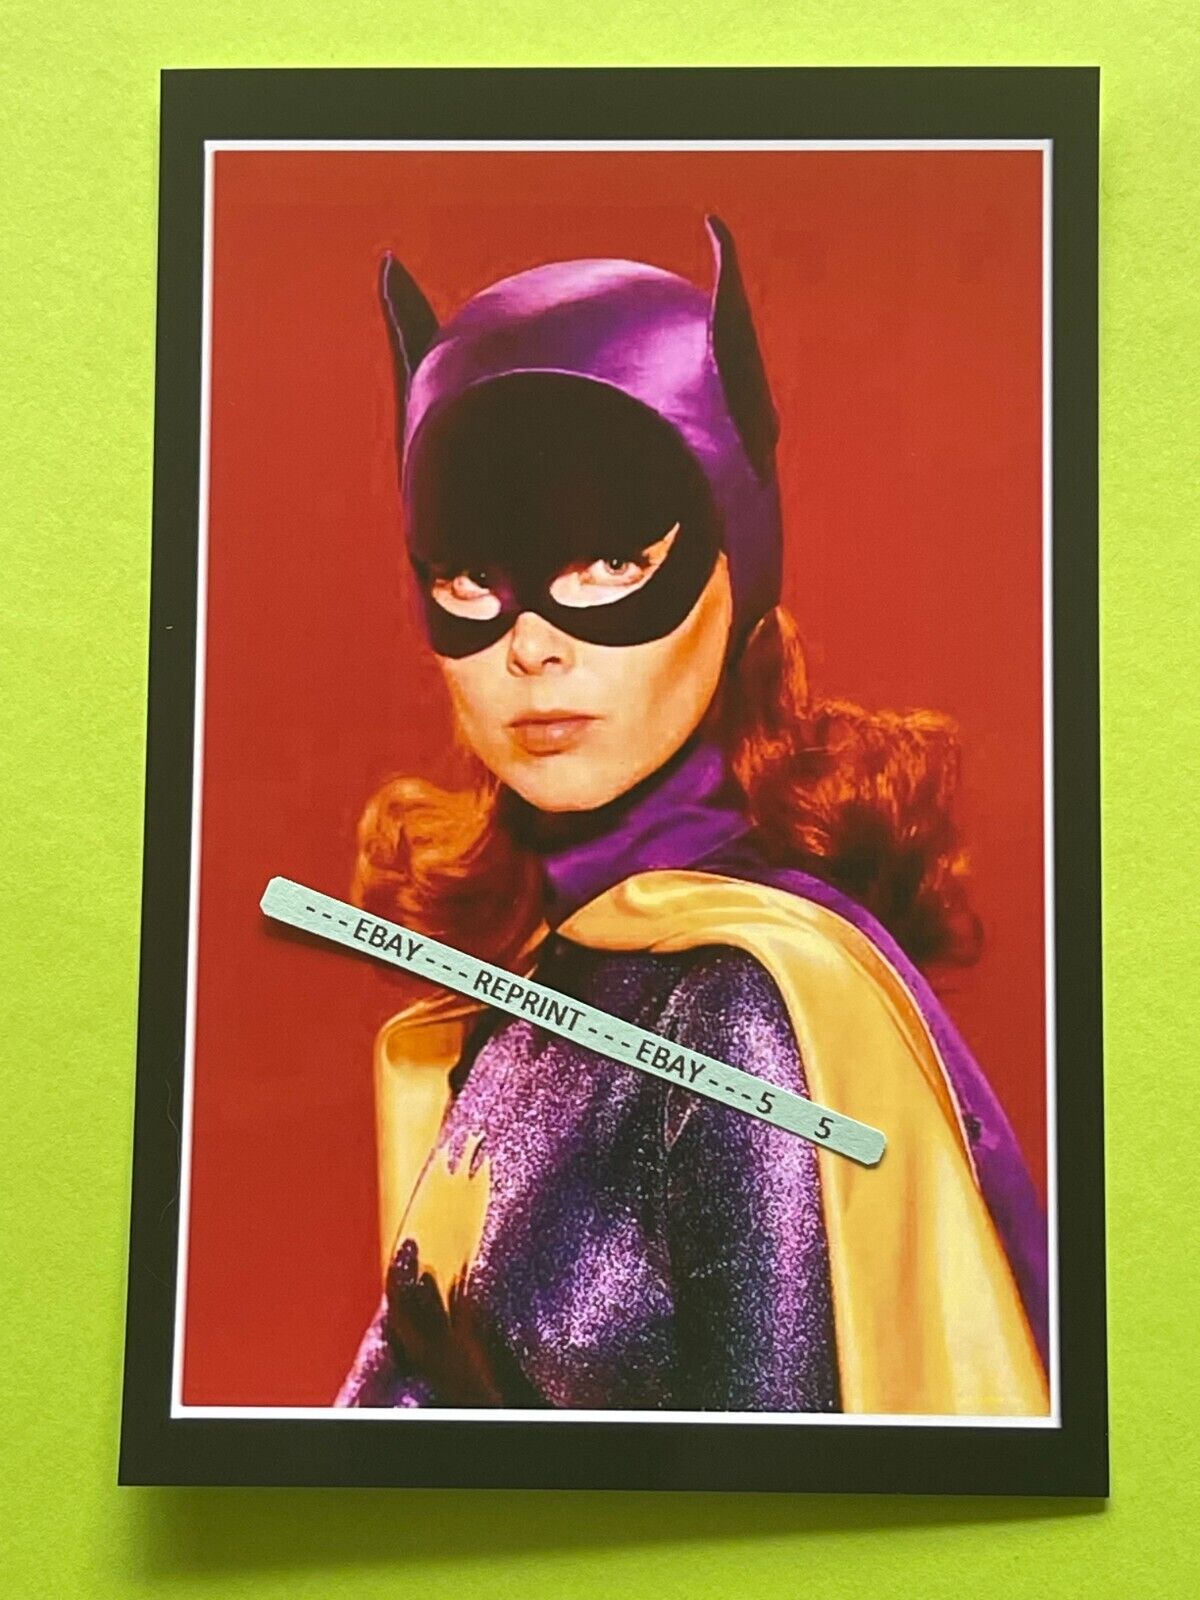 Found 4X6 PHOTO from the Old BATMAN TV Show with Yvonne as BATGIRL